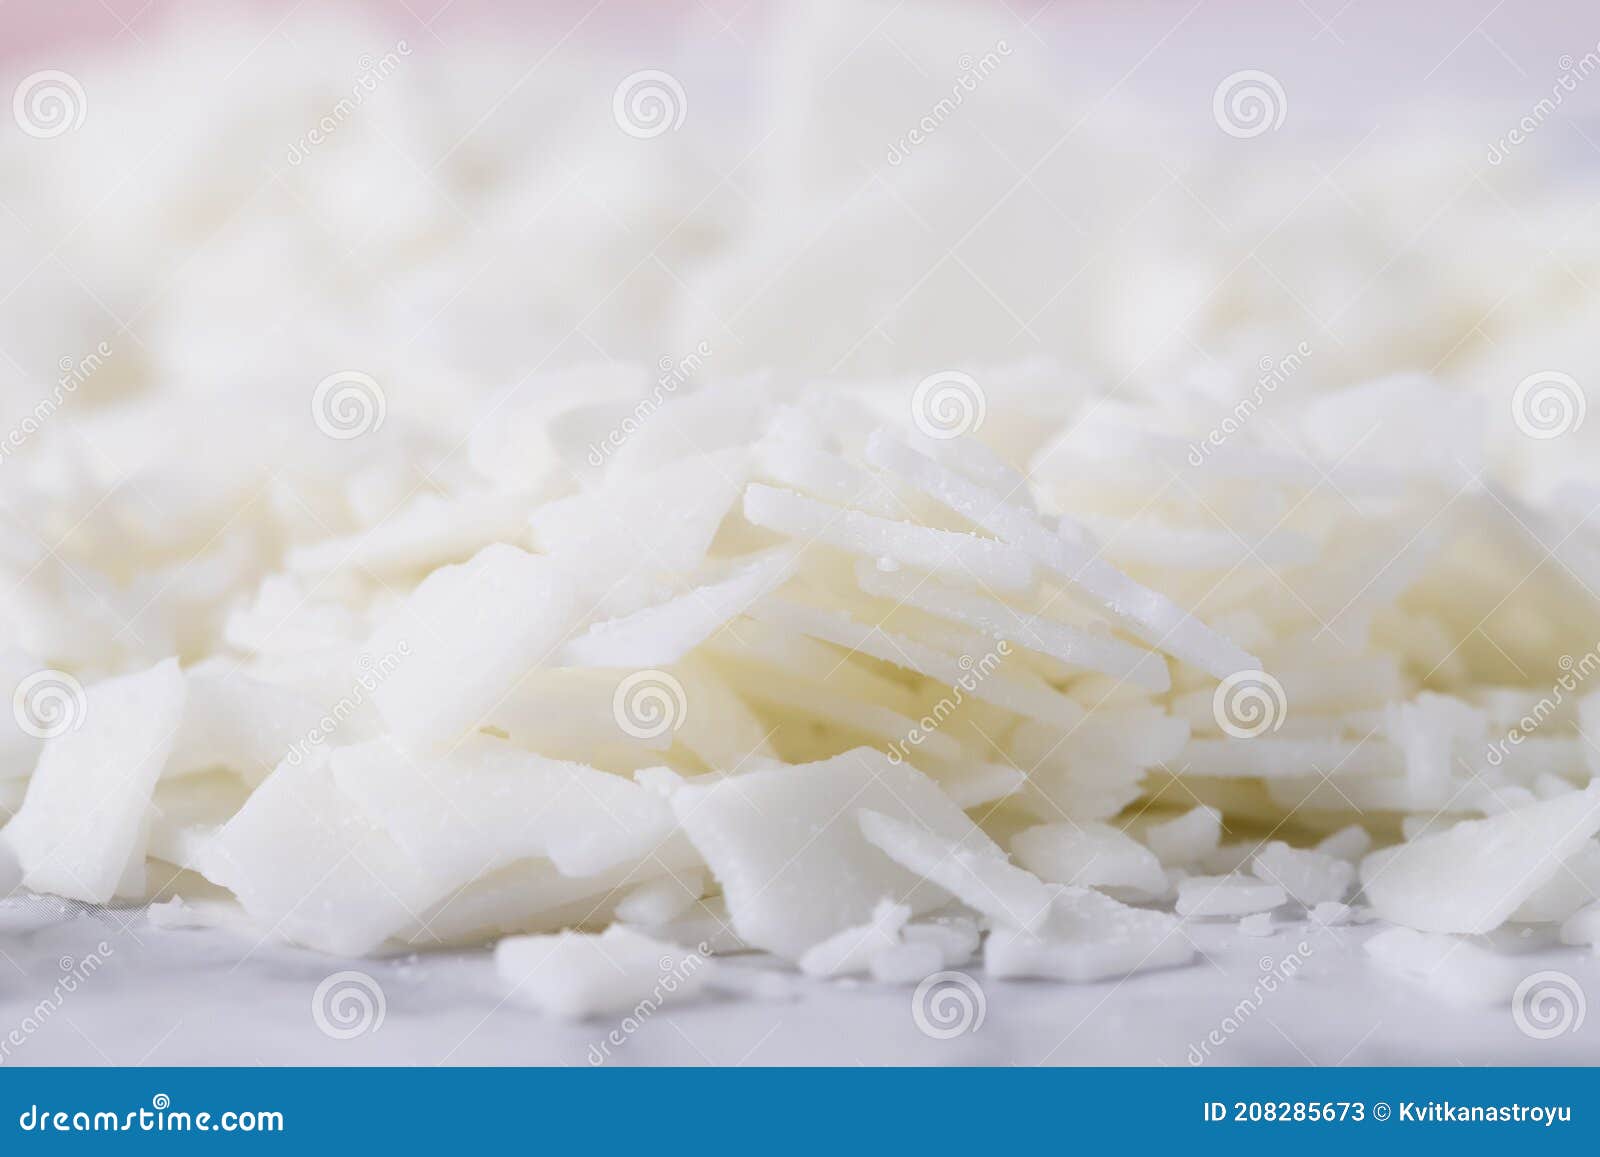 White Soy Wax Flakes for Candle Making Stock Image - Image of